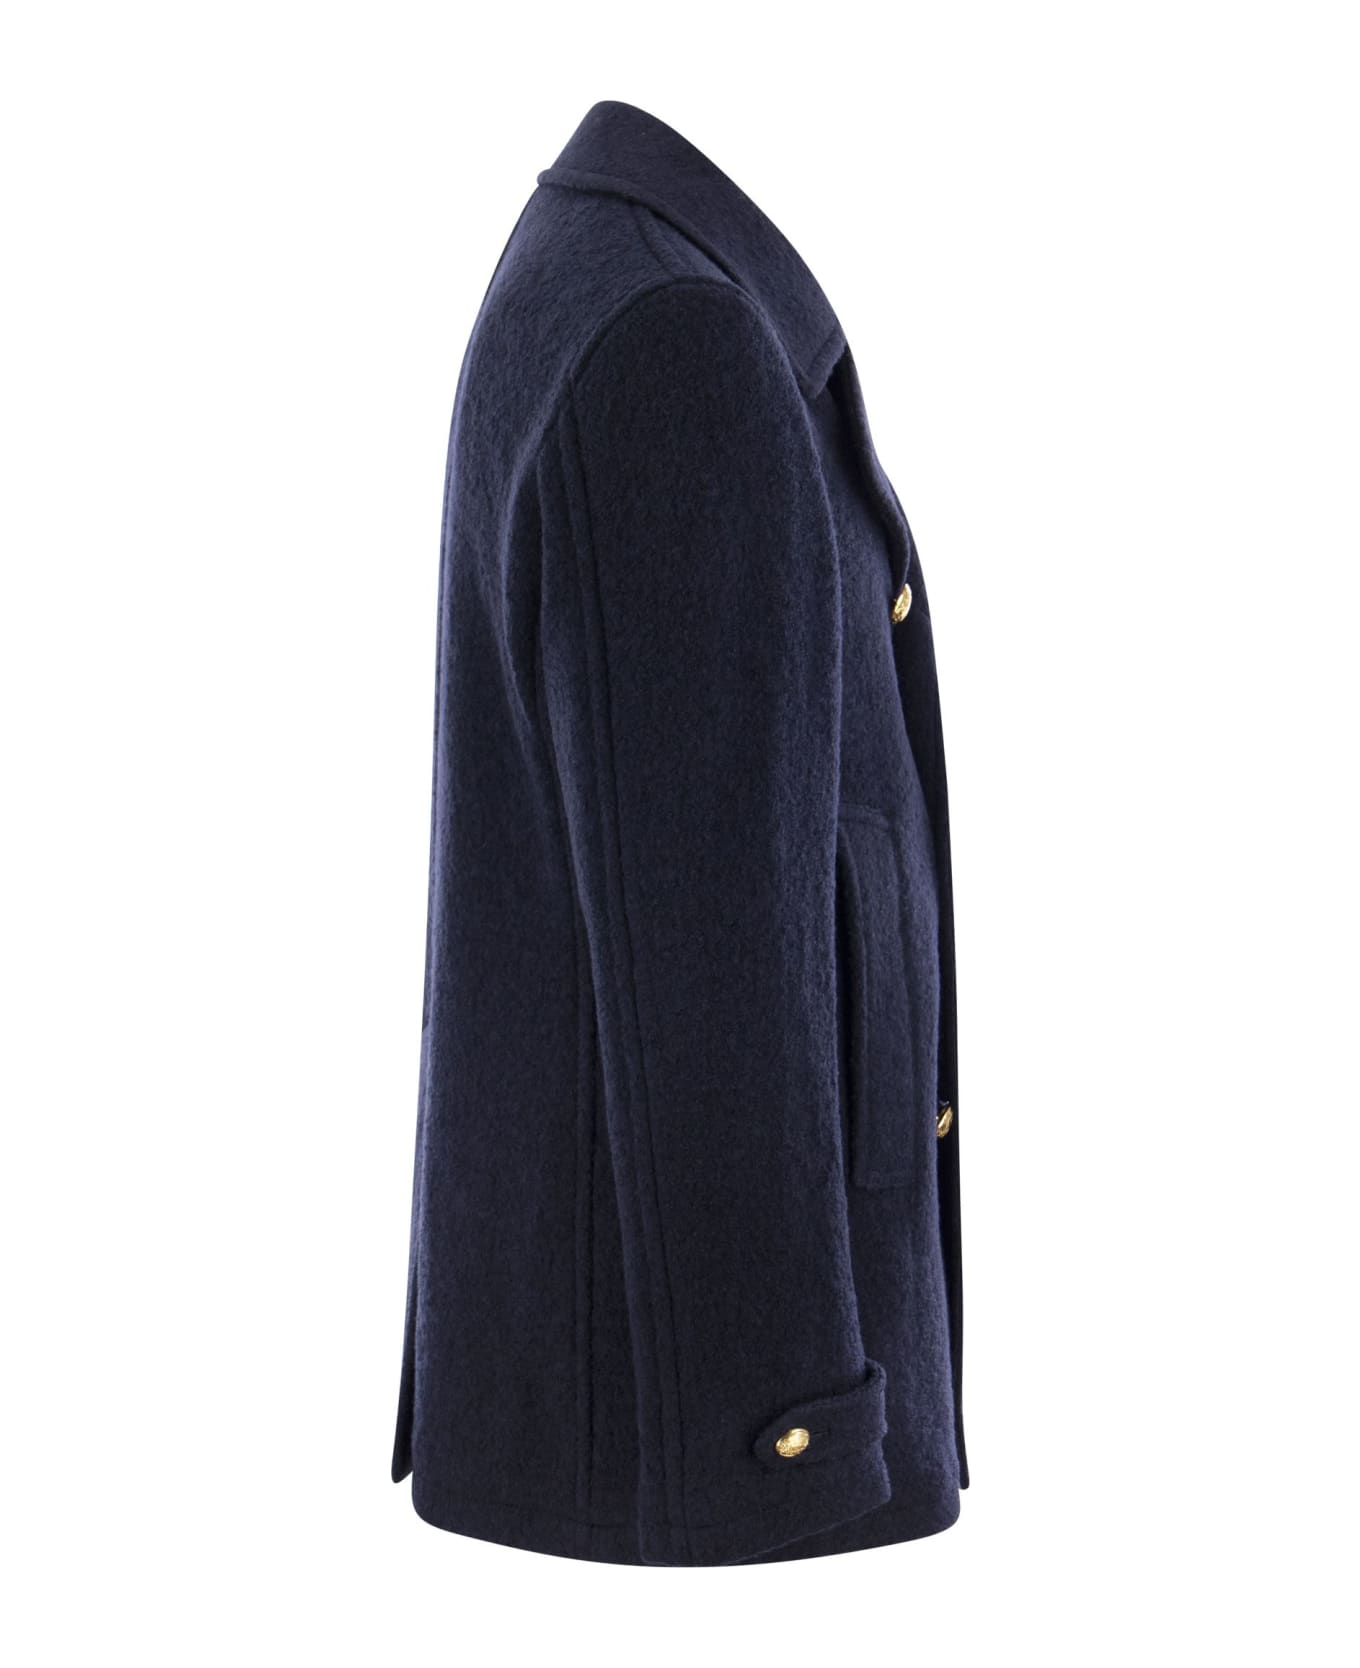 Tagliatore Double-breasted Coat - Navy Blue